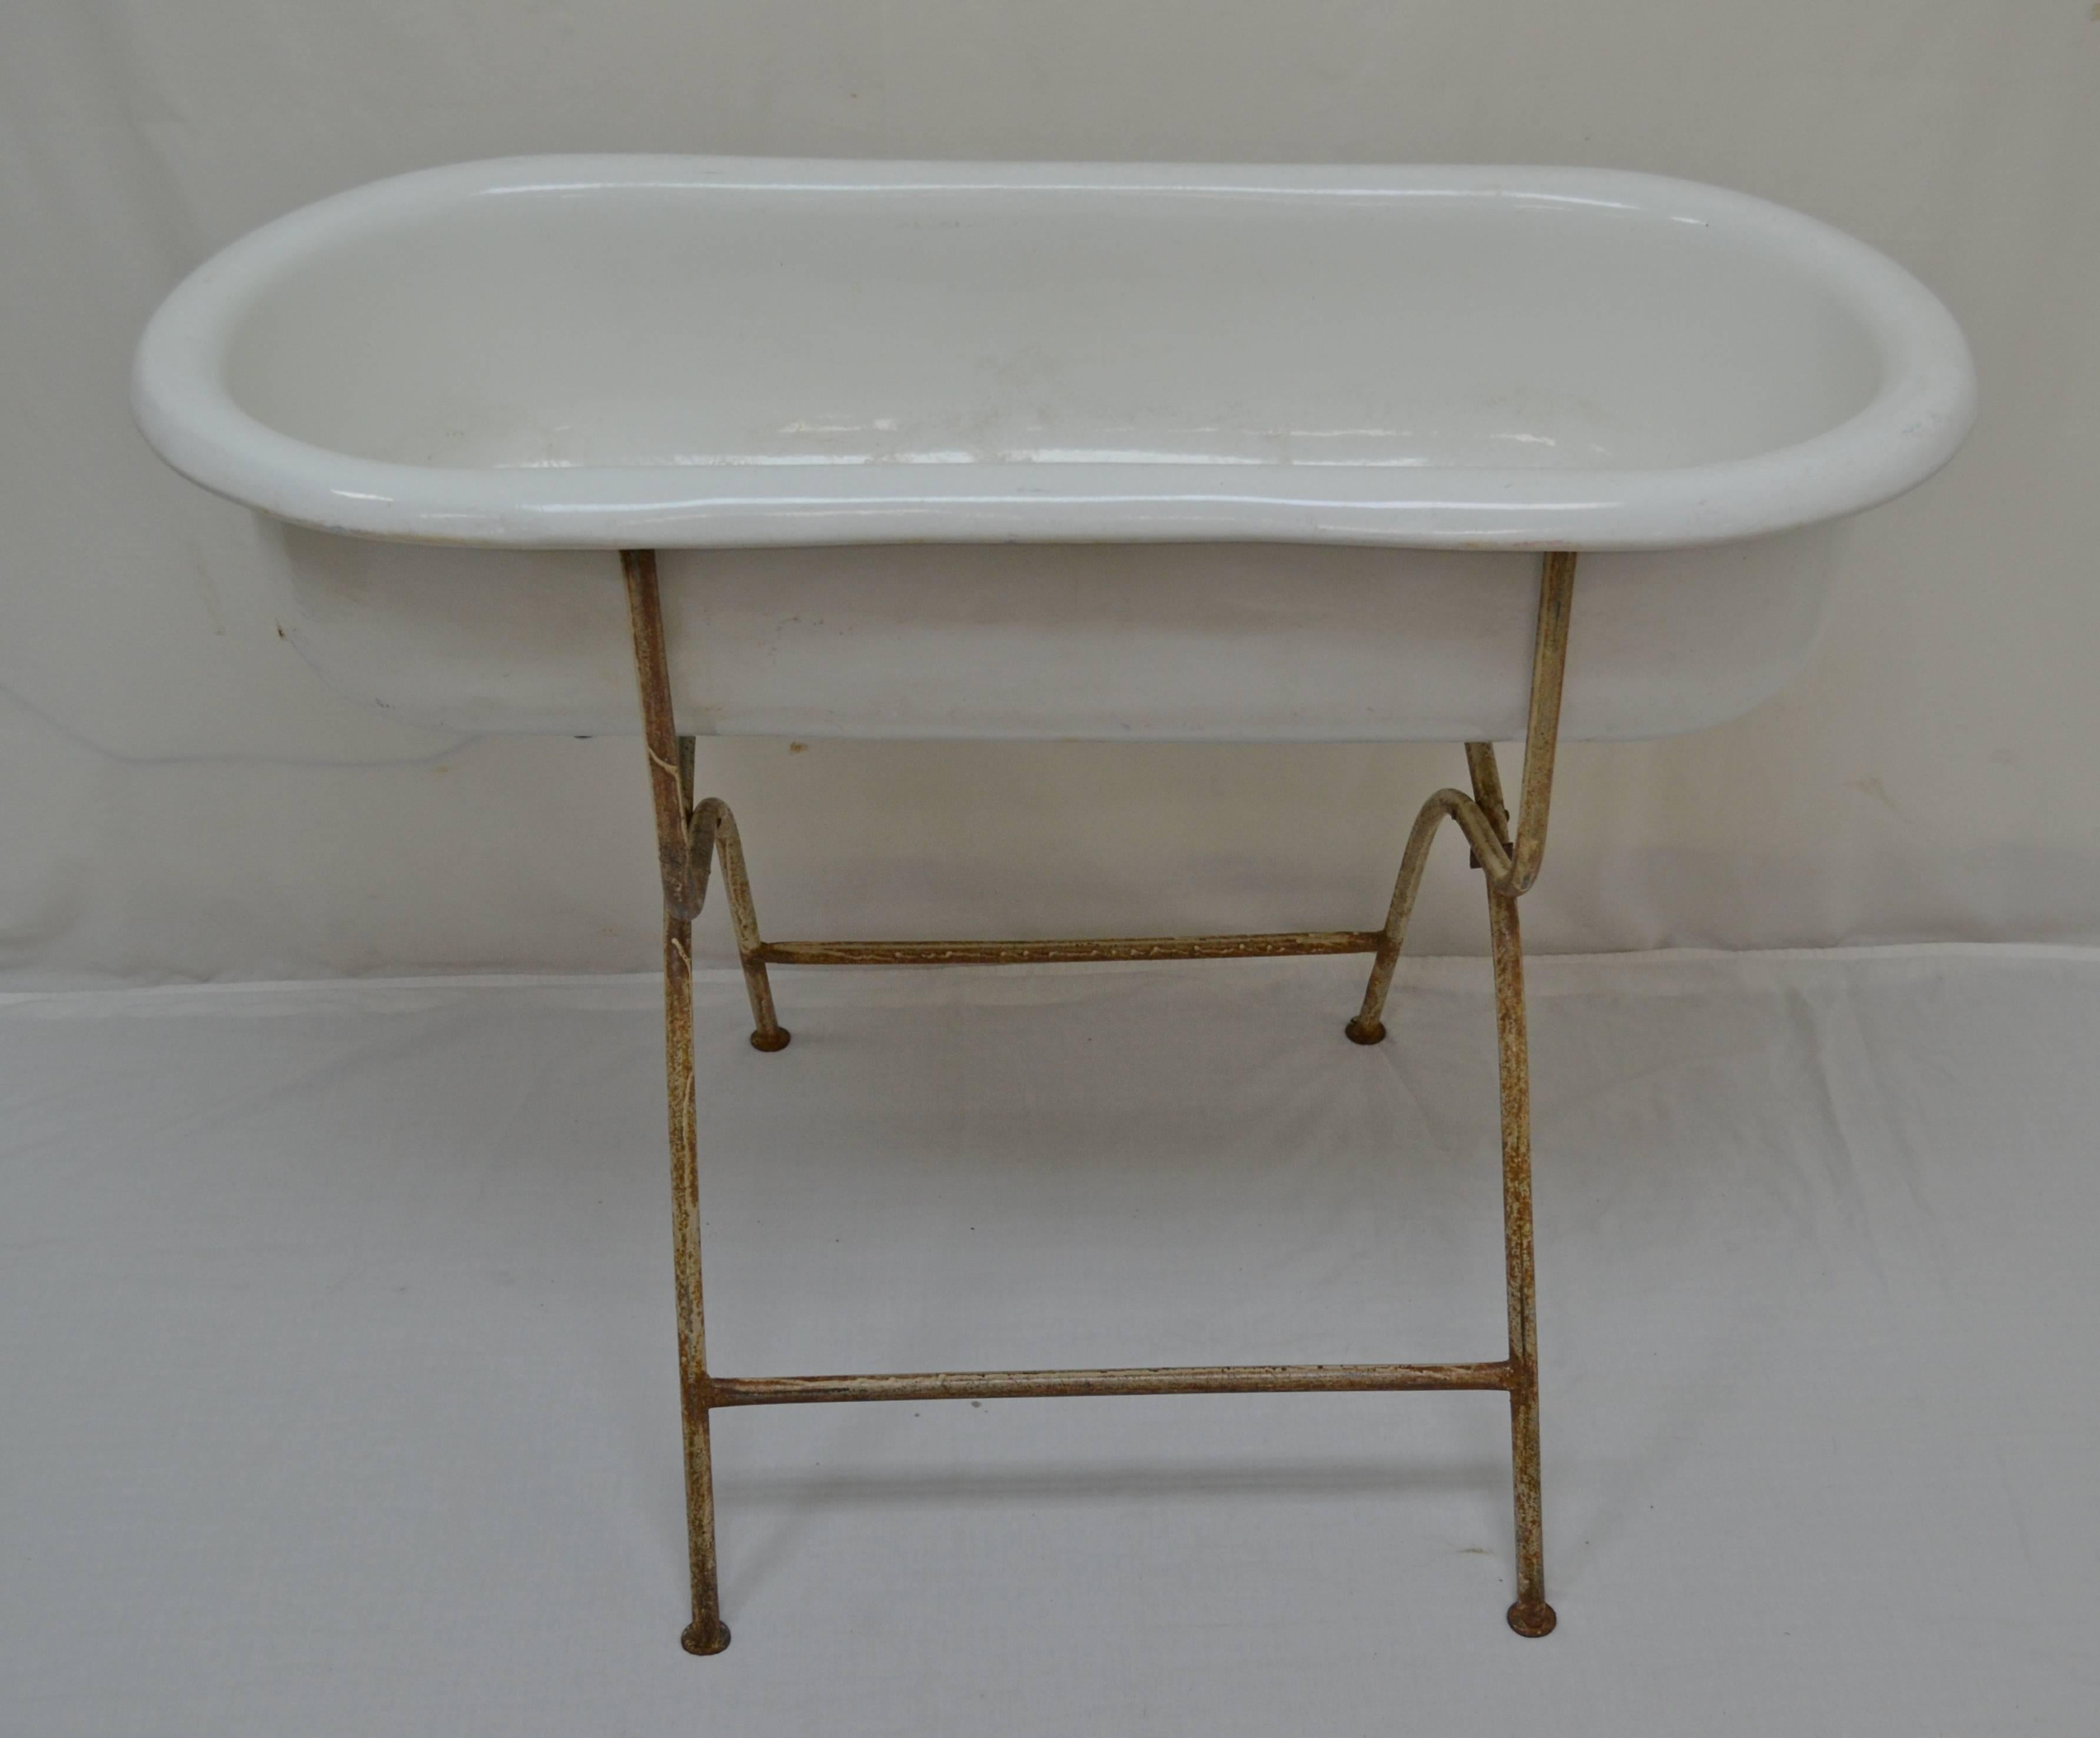 An attractive vintage enameled baby bath by “Zim” of Hungary, on its original tubular steel folding stand. There are some small scratches and repairs to the enamel. The stand is in old worn and rusted cream paint. The drain tap is missing but could